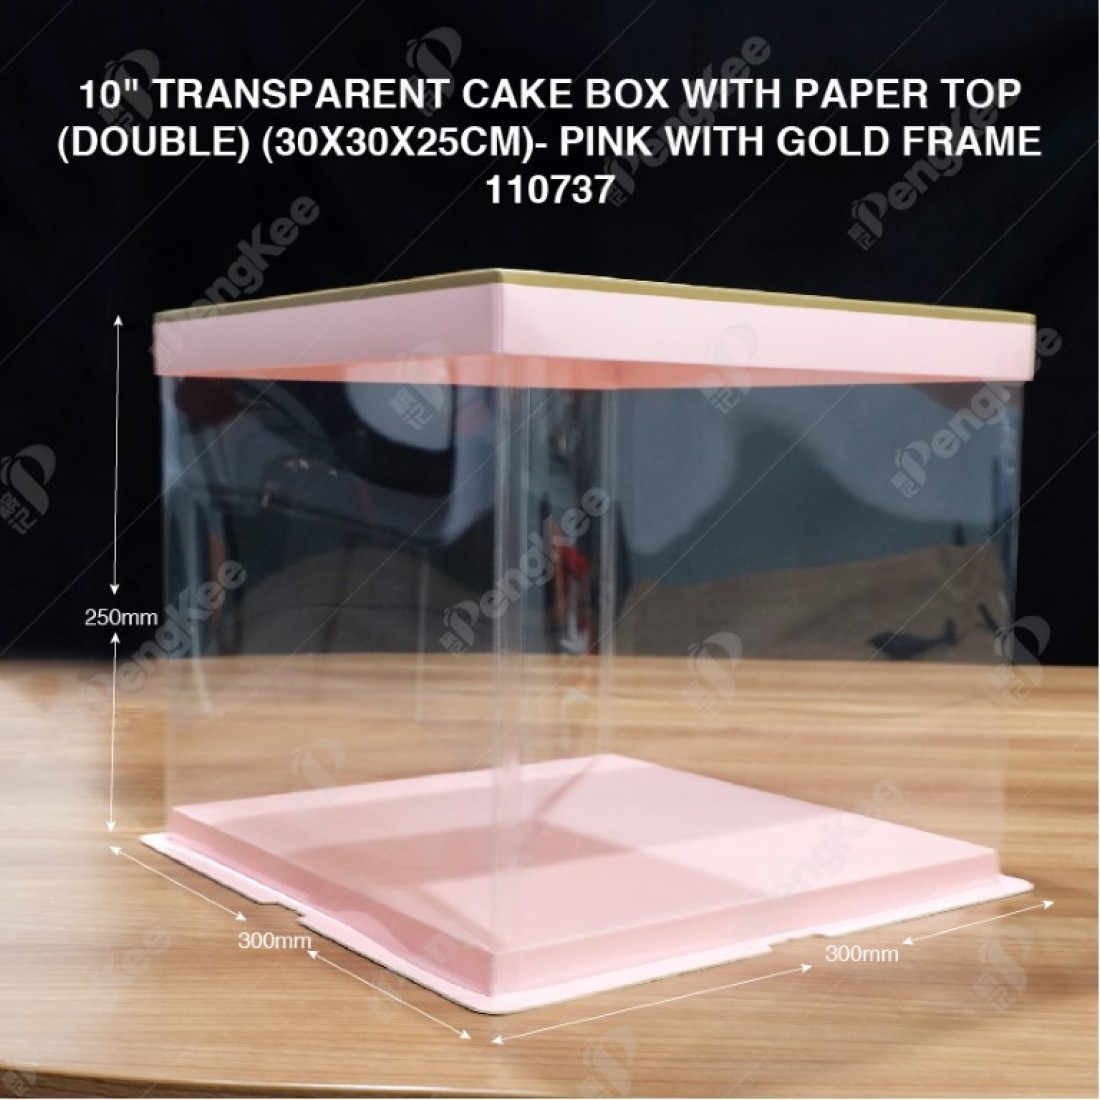 10" TRANSPARENT CAKE BOX WITH PAPER TOP(DOUBLE) (30*30*25CM)- PINK WITH GOLD FRAME